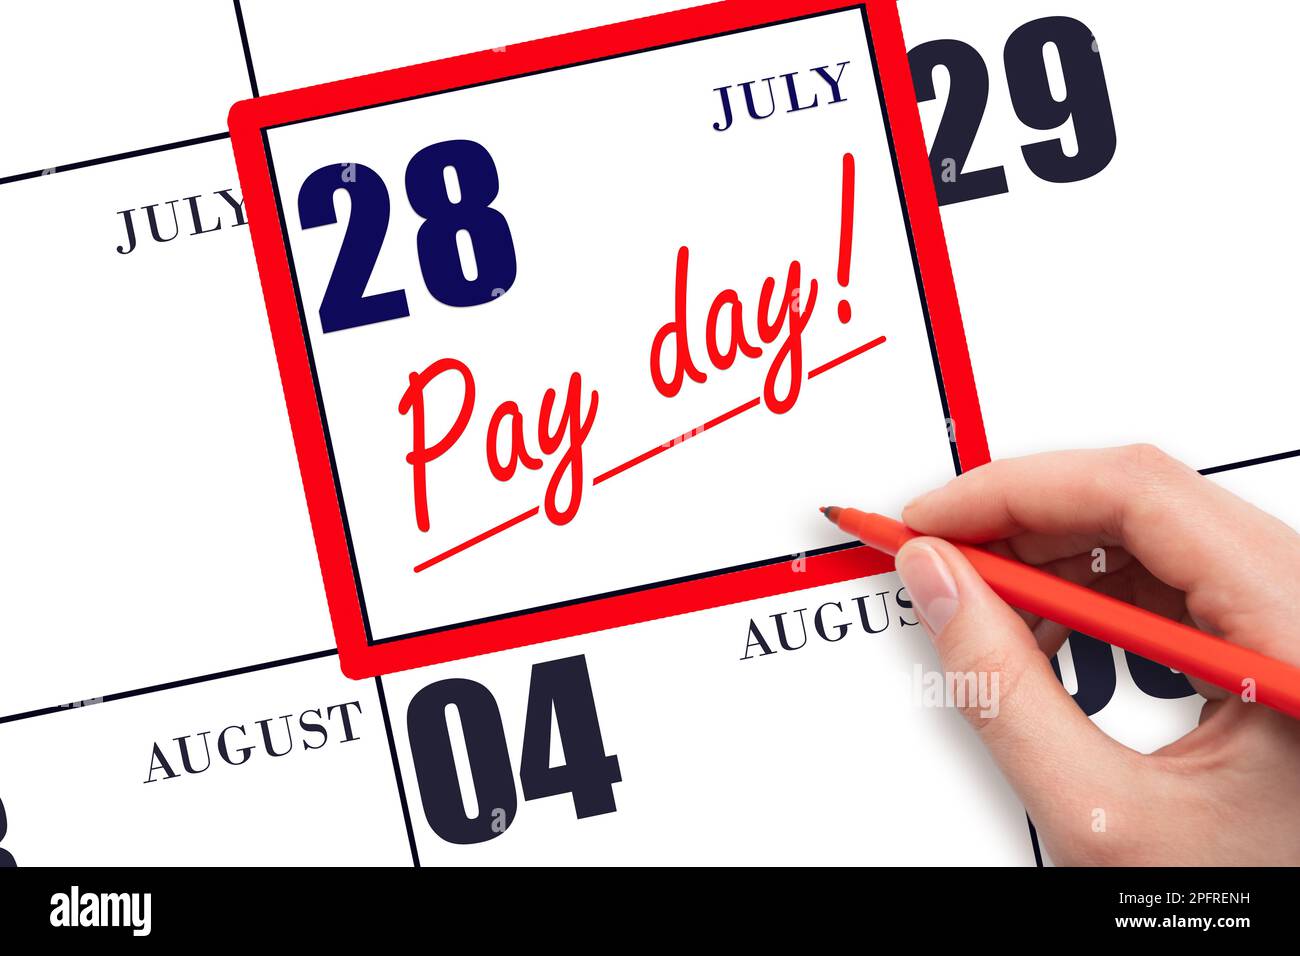 28th day of July. Hand writing text PAY DATE on calendar date July 28 and underline it. Payment due date.  Reminder concept of payment. Summer month, Stock Photo